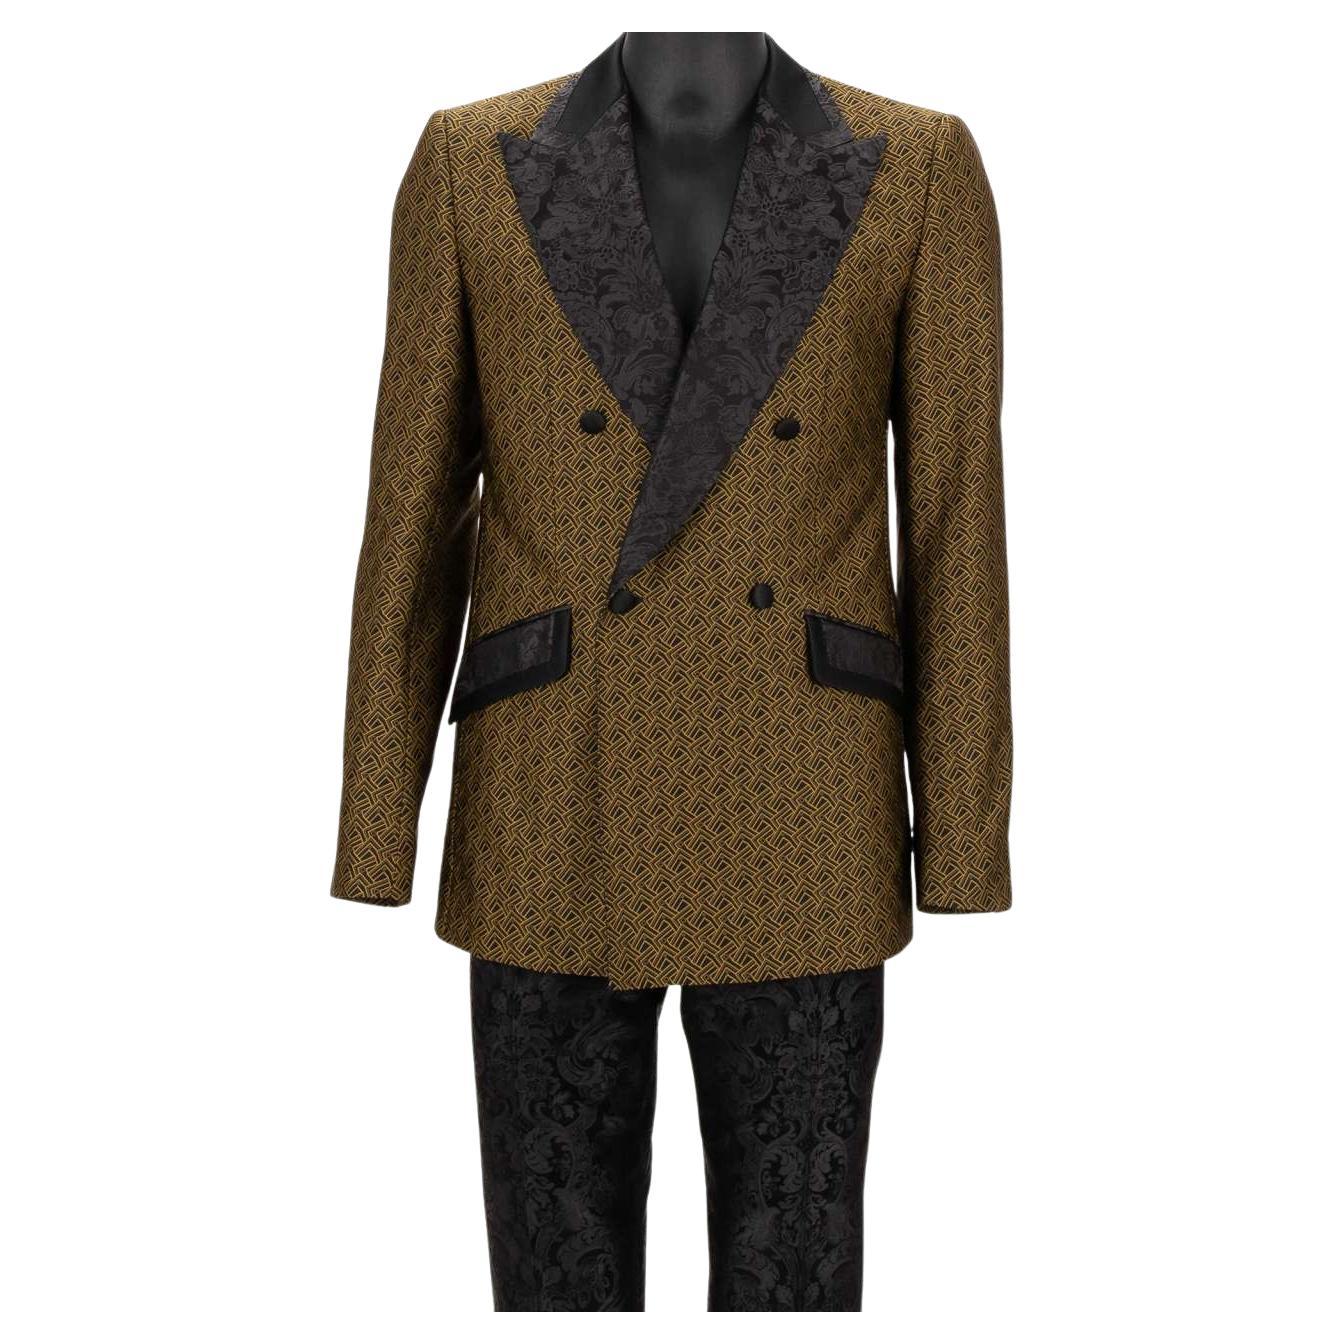 Dolce & Gabbana Baroque Jacquard Double breasted Suit Gold Black 48 US 38 M For Sale